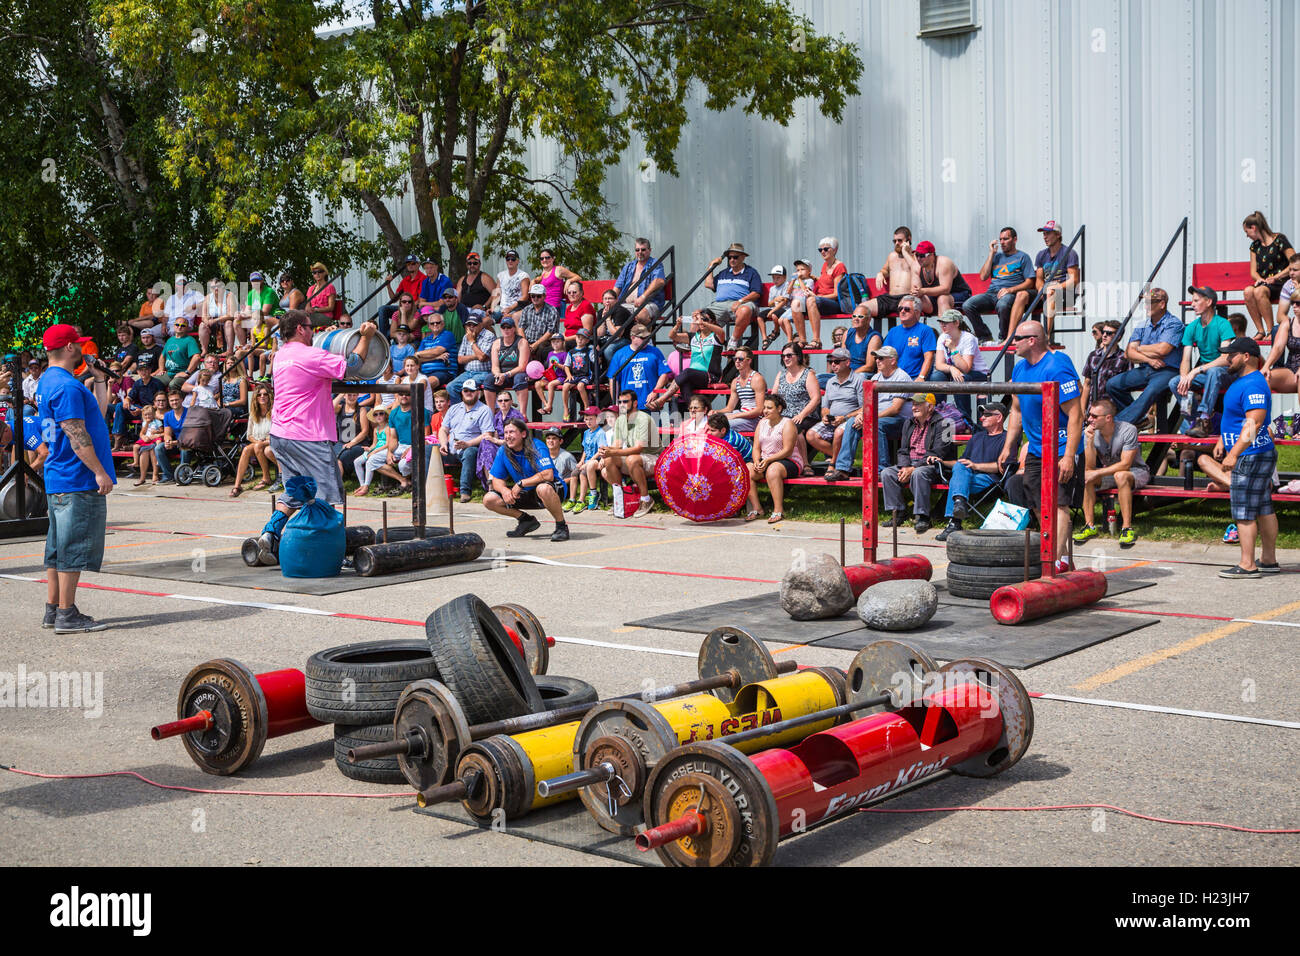 The Strongman competition on at the 2016 Harvest Festival in Winkler, Manitoba, Canada. Stock Photo